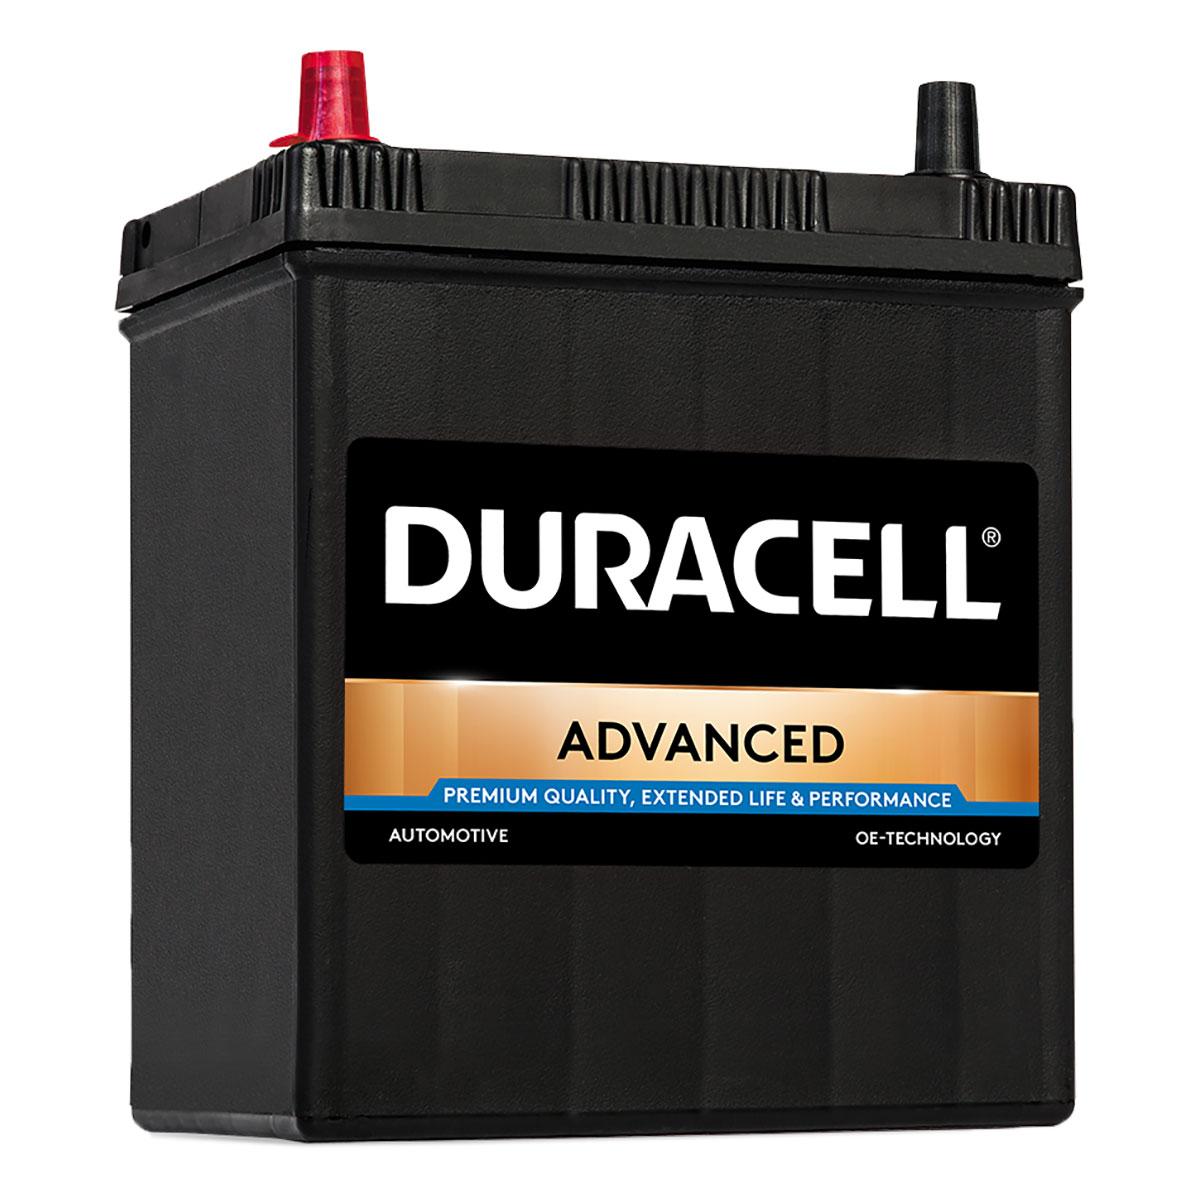 duracell-055-da40l-advanced-car-battery-free-uk-mainland-delivery